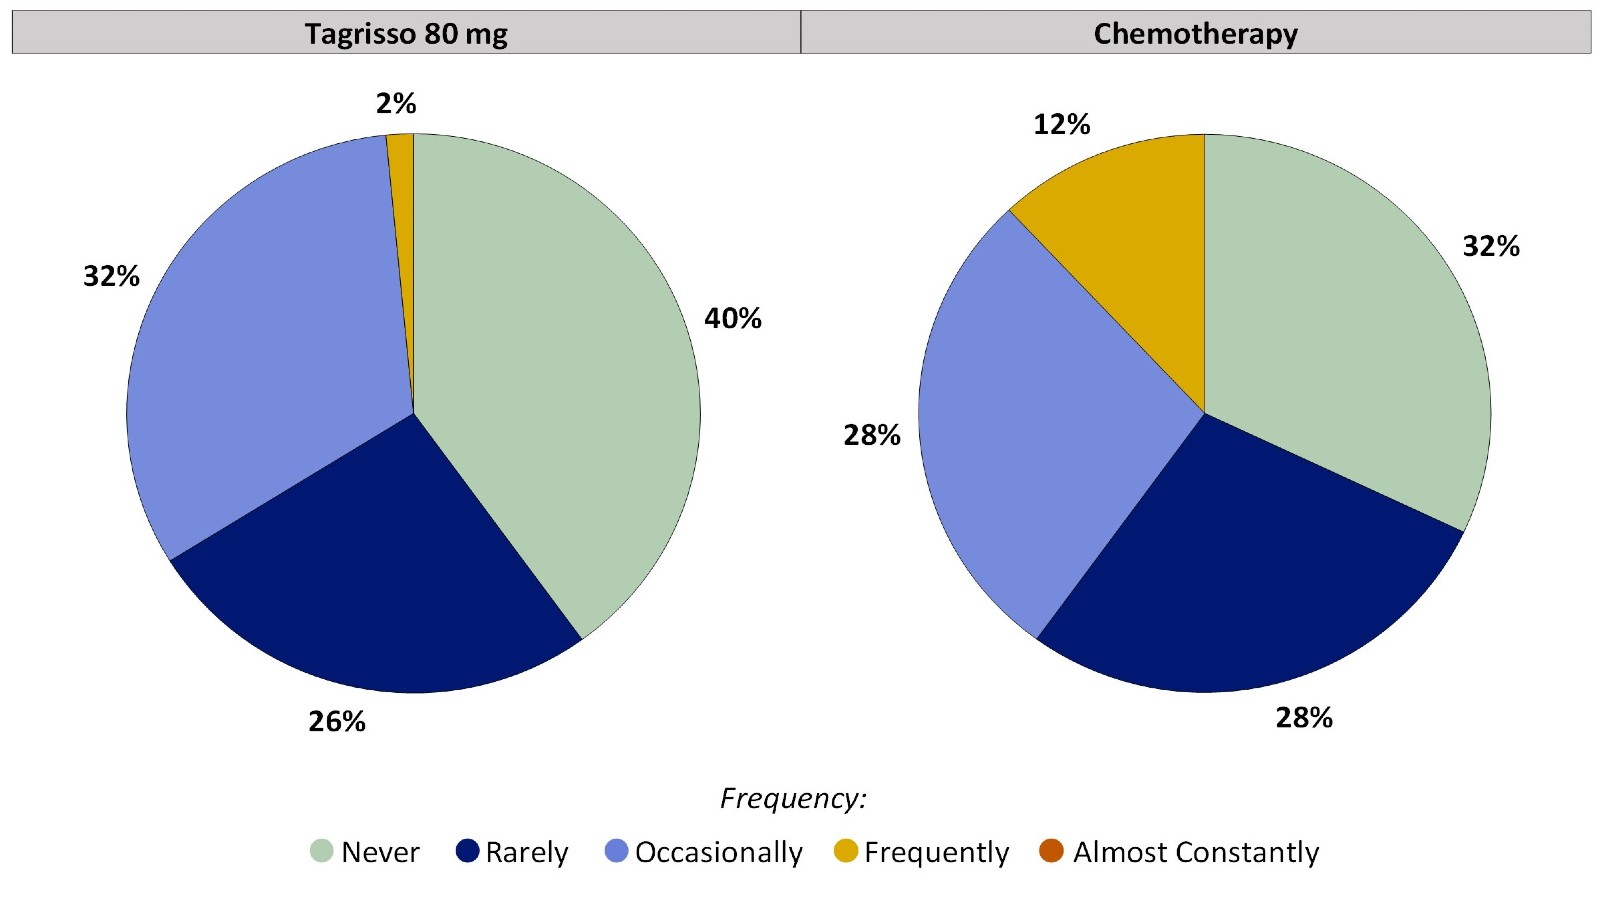 Two pie charts, one for Tagrisso and the other for chemotherapy, which includes only those patients who had no abdominal pain before treatment. The pie charts summarize the percentage of patients by worst reported abdominal pain. In the Tagrisso arm, Never (40%), Rarely (26%), Occasionally (32%), Frequently (2%) and Almost constantly (0%). In the chemotherapy arm, Never (32%), Rarely (28%), Occasionally (28%), Frequently (12%), and Almost constantly (0%).